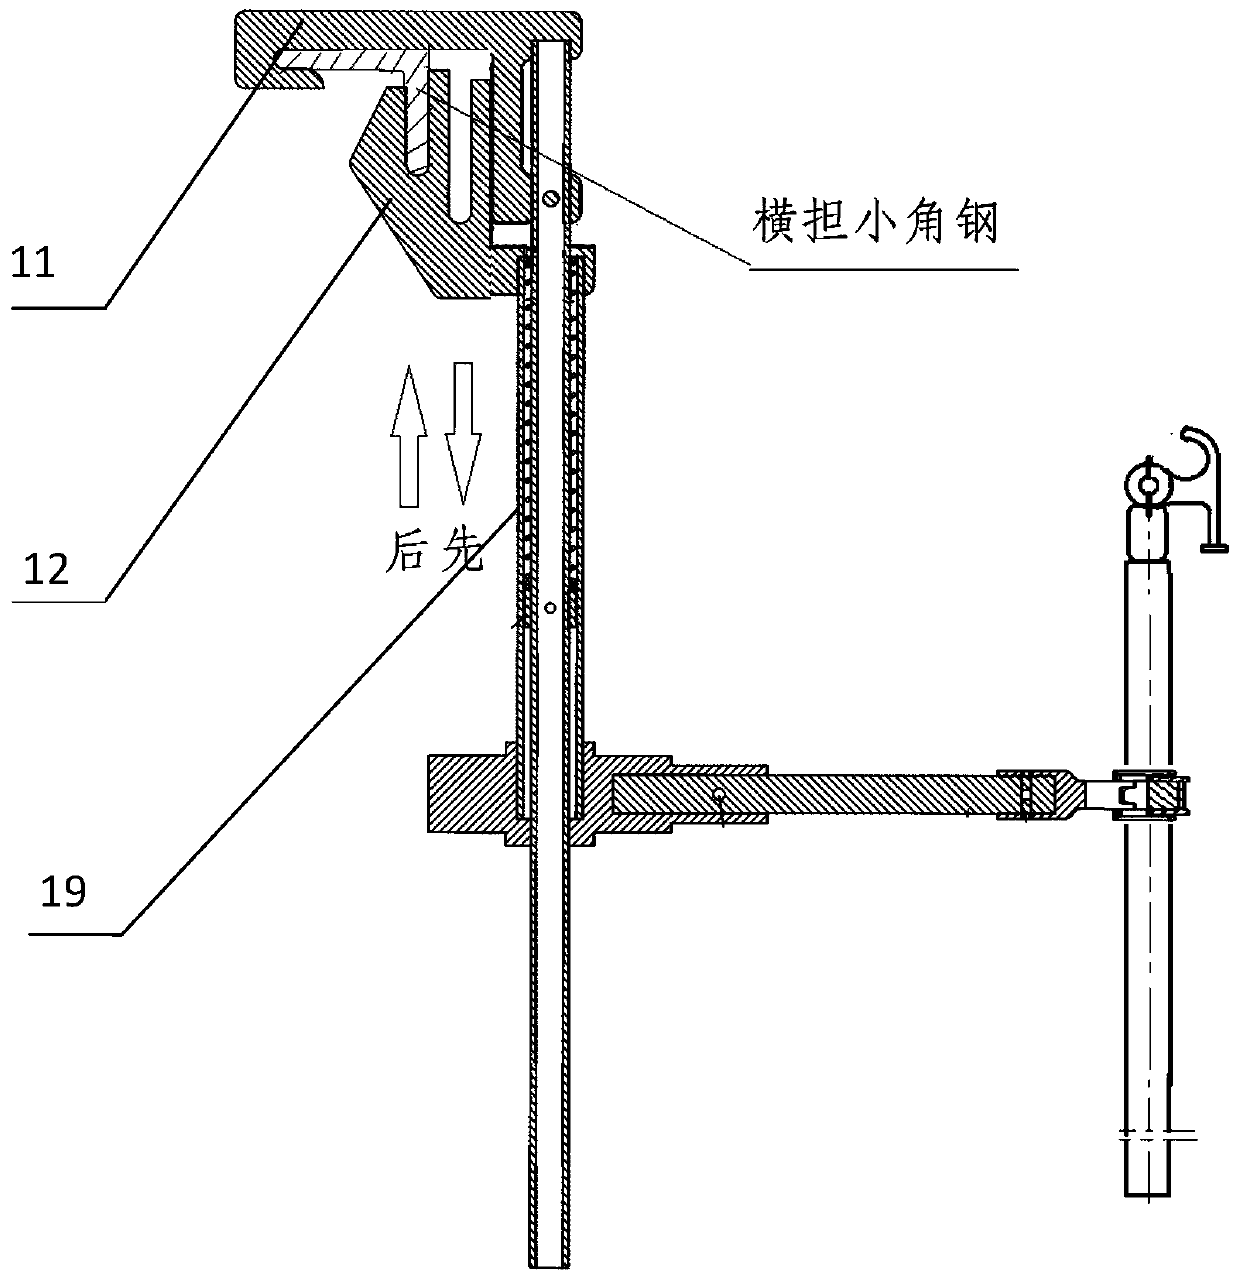 Insulating hanging rack and telescopic clamp for electrified connection and operation method